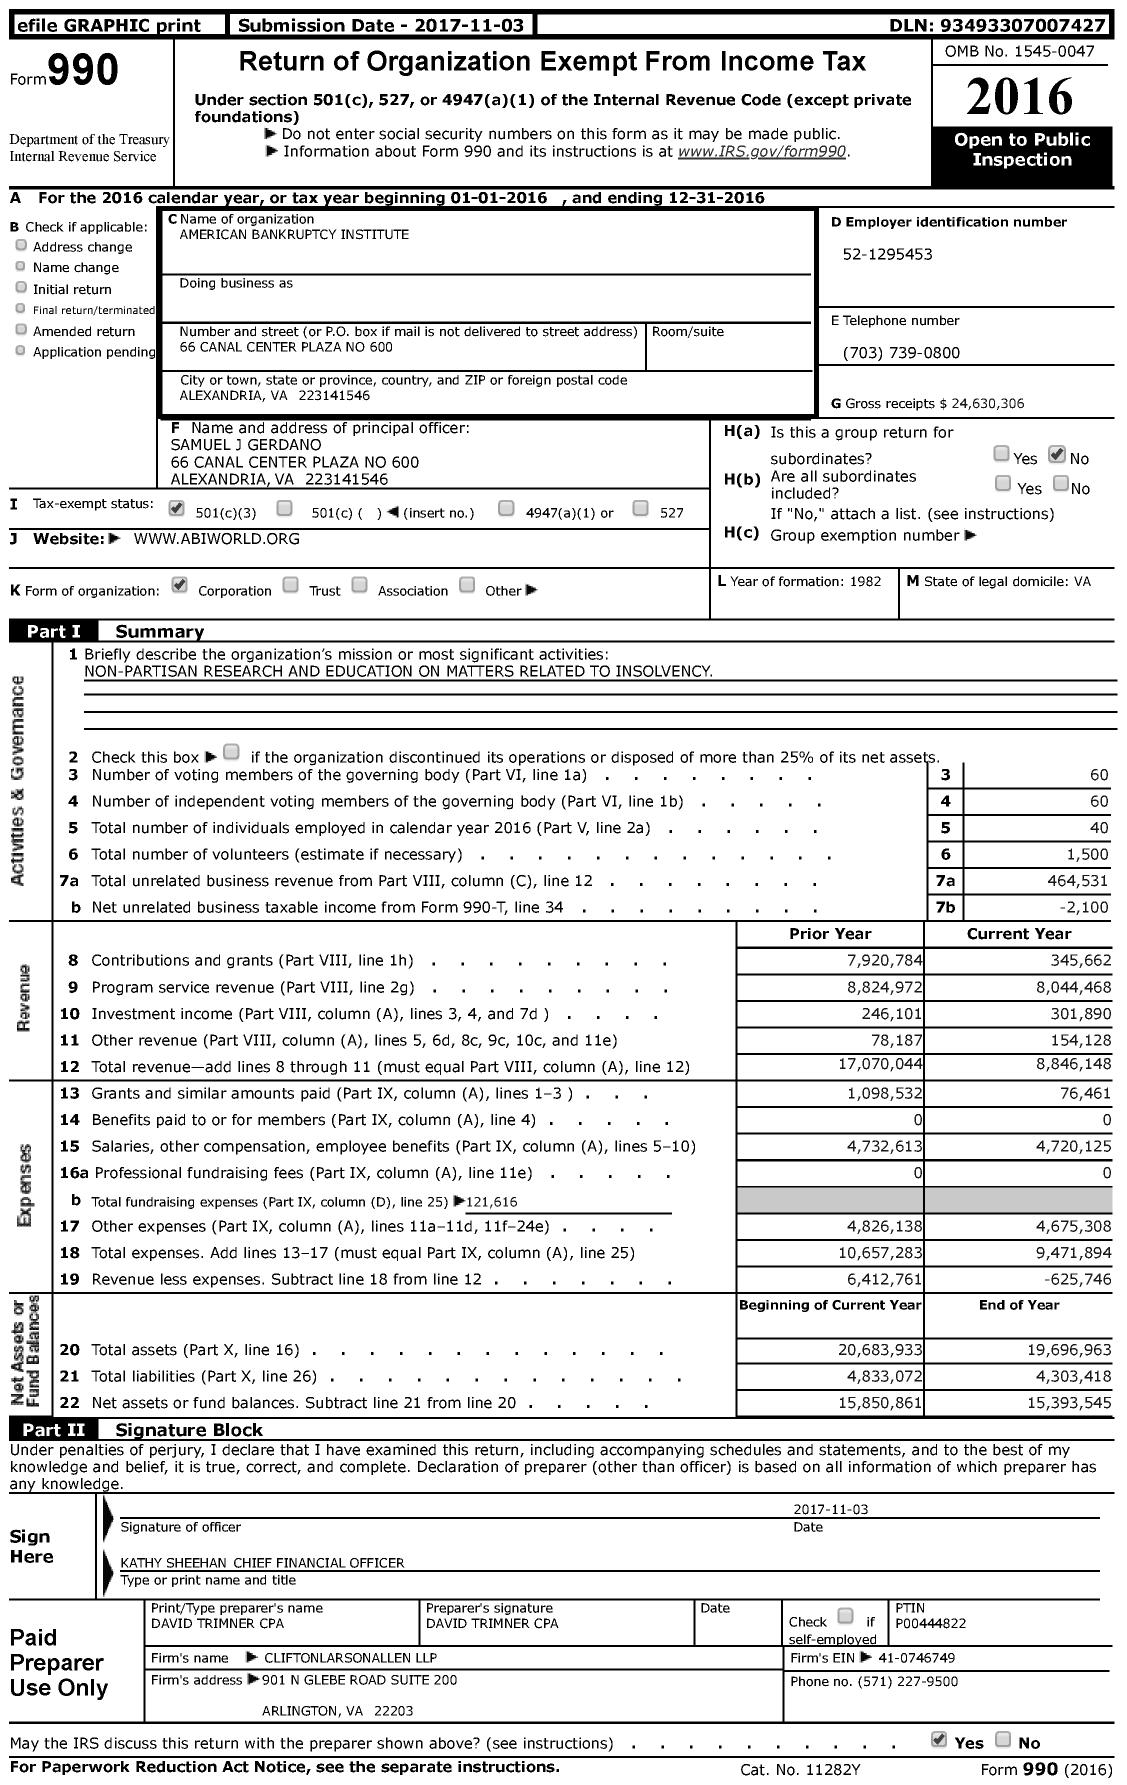 Image of first page of 2016 Form 990 for American Bankruptcy Institute (ABI)